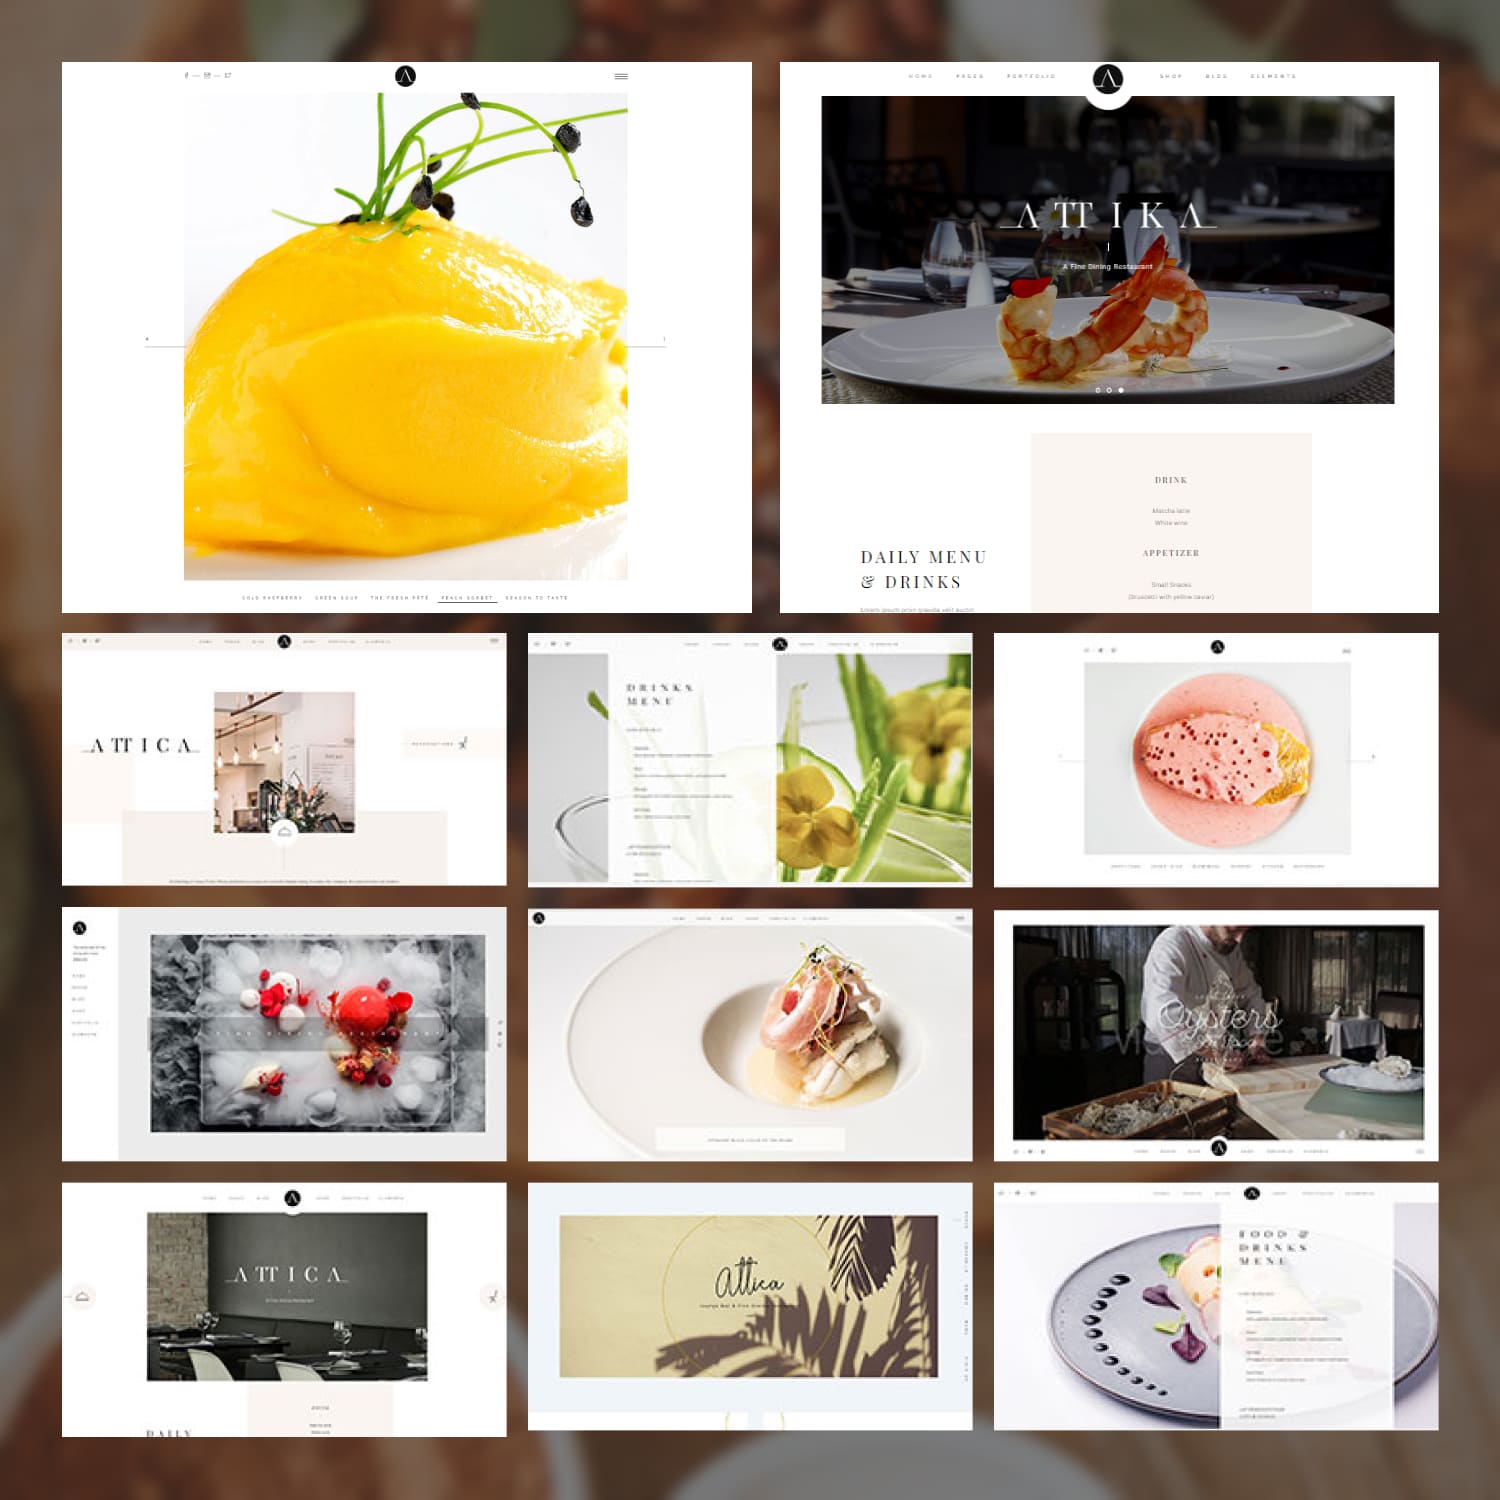 A pack of irresistible images of WordPress pages on a restaurant theme.